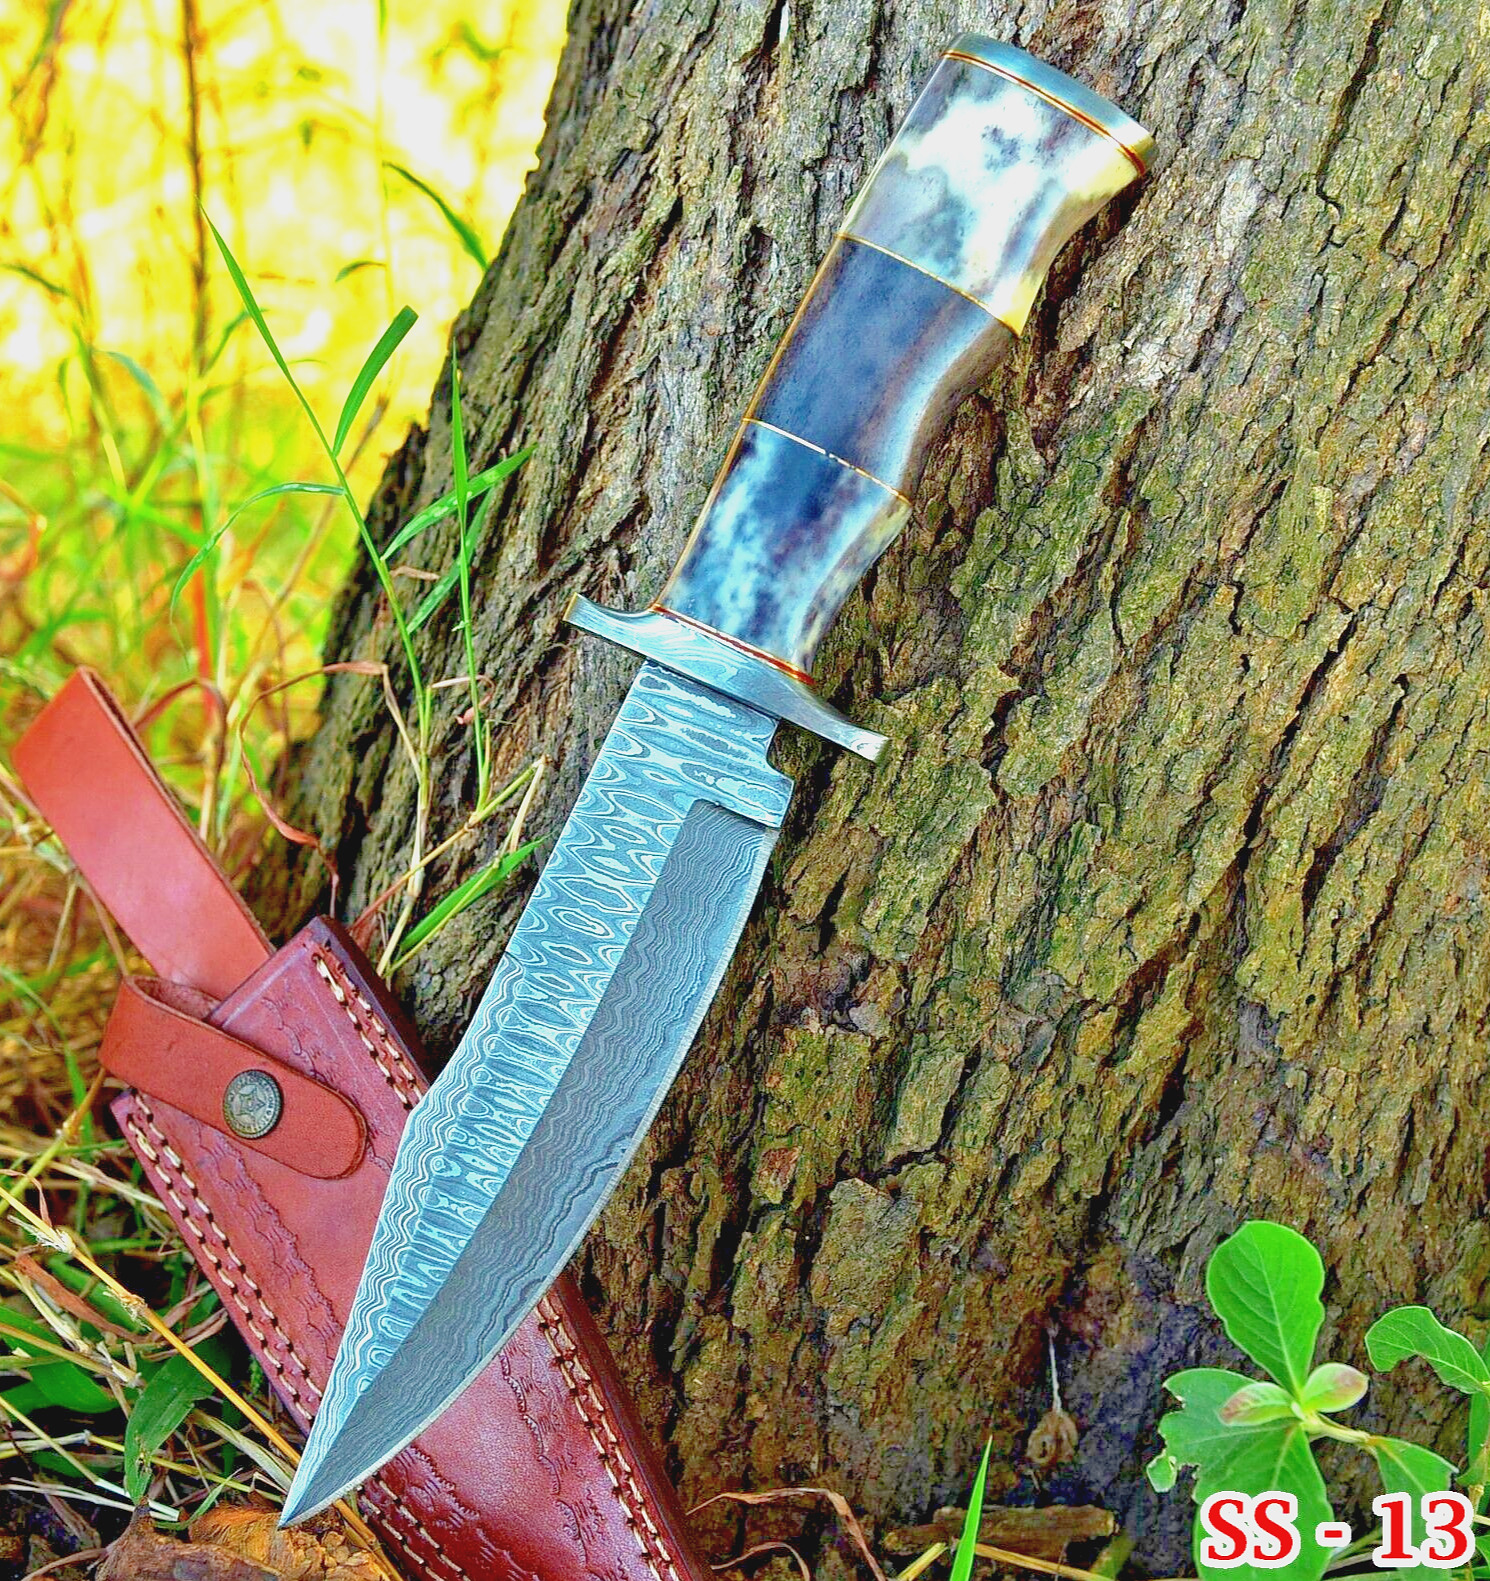 Custom Handmade Forge Damascus Steel Bowie Hunting Knife Survival Camping SS-13